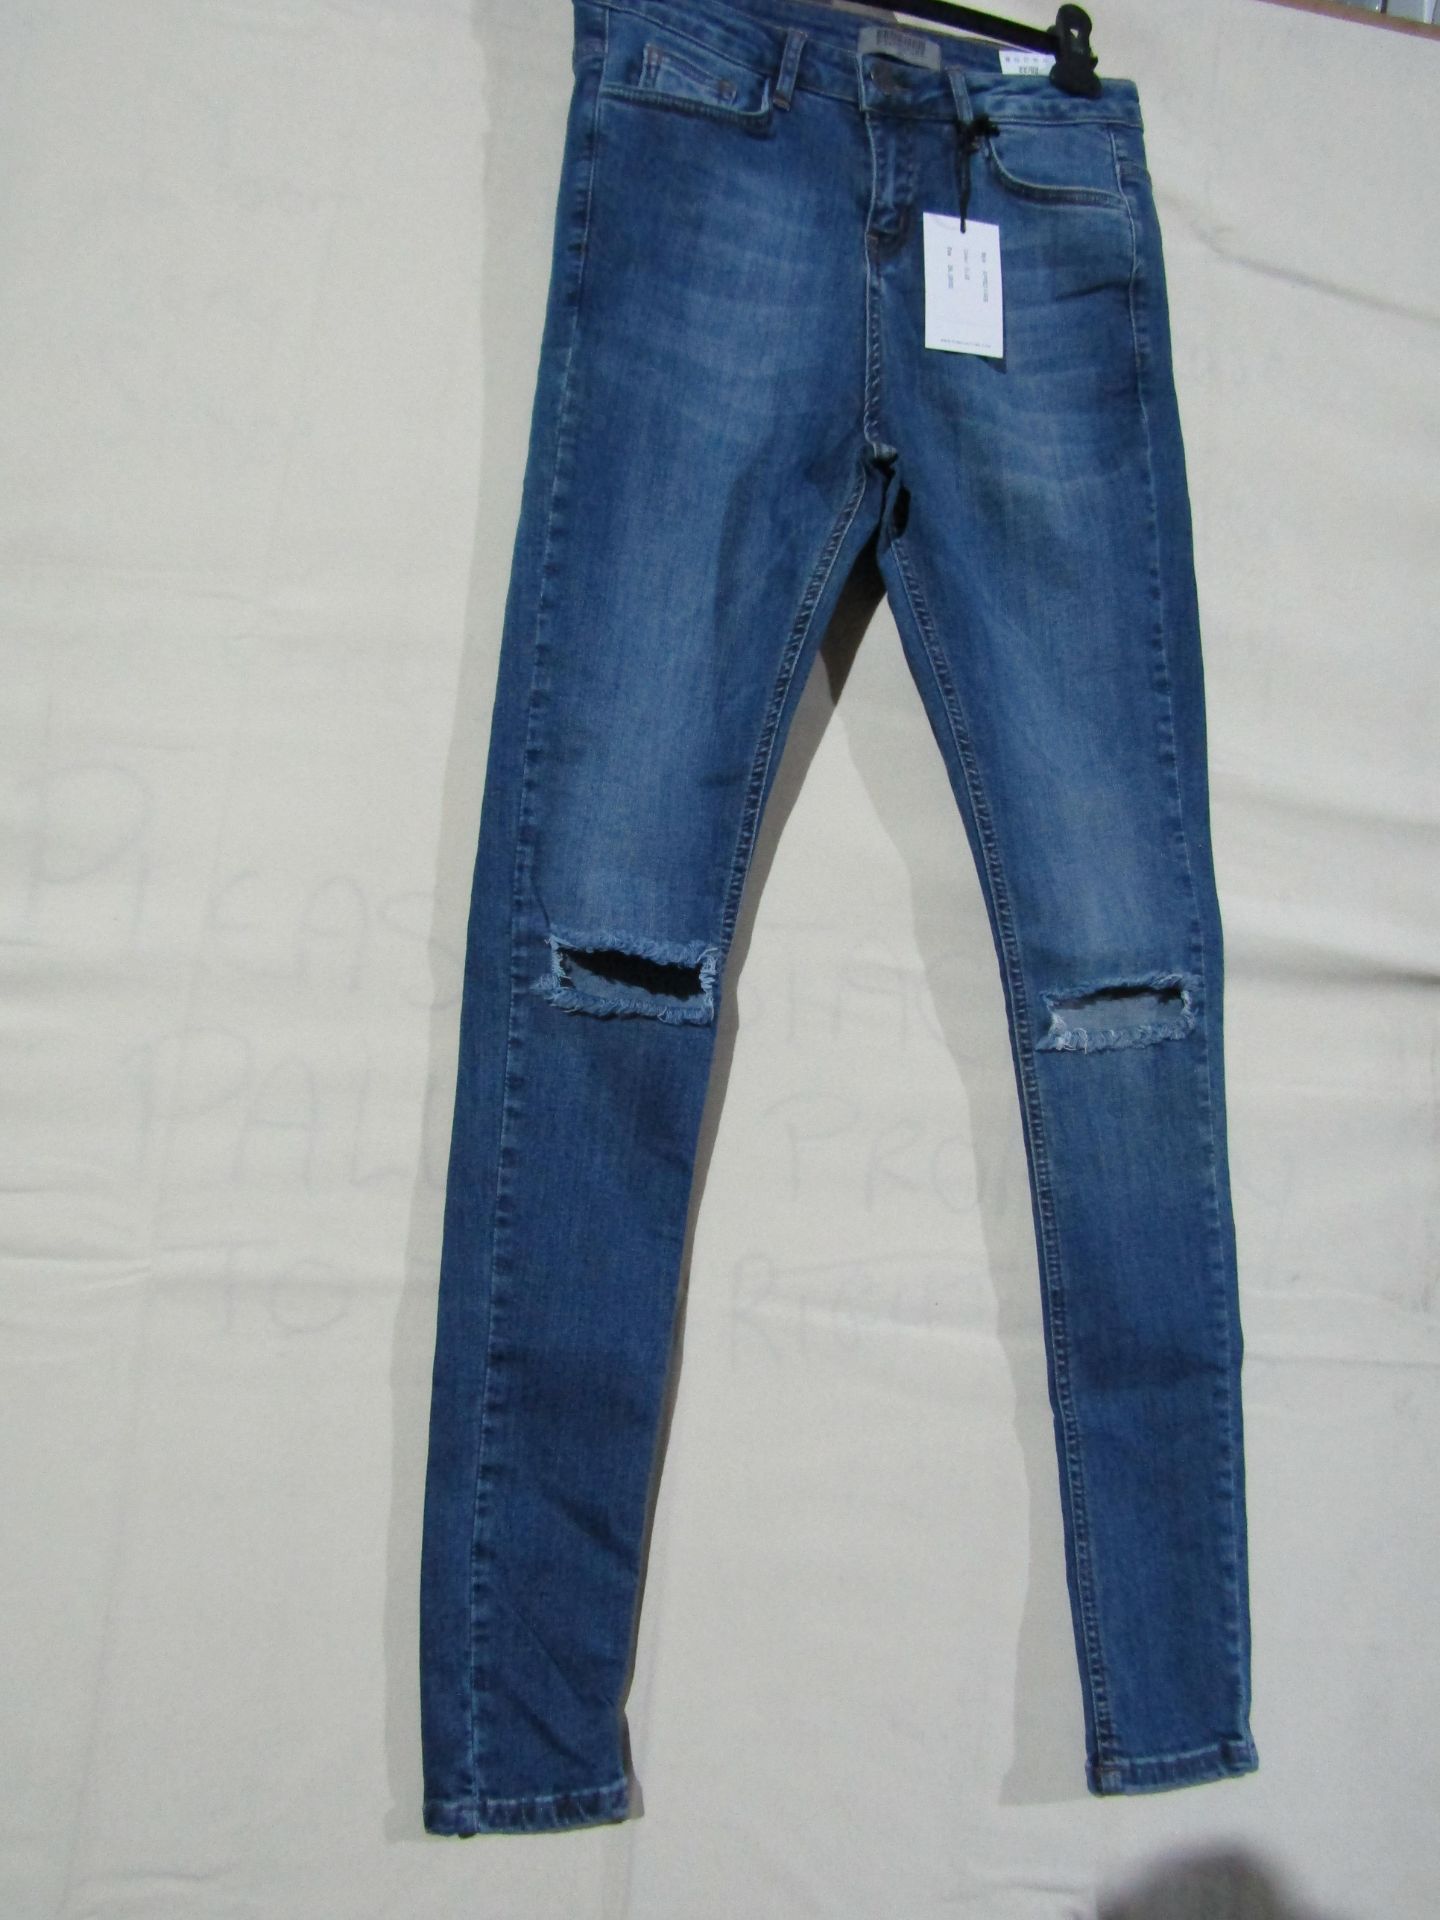 RiskCoulture Ripped Knee Skinny Jeans Size 30/30 Skinny Jeans